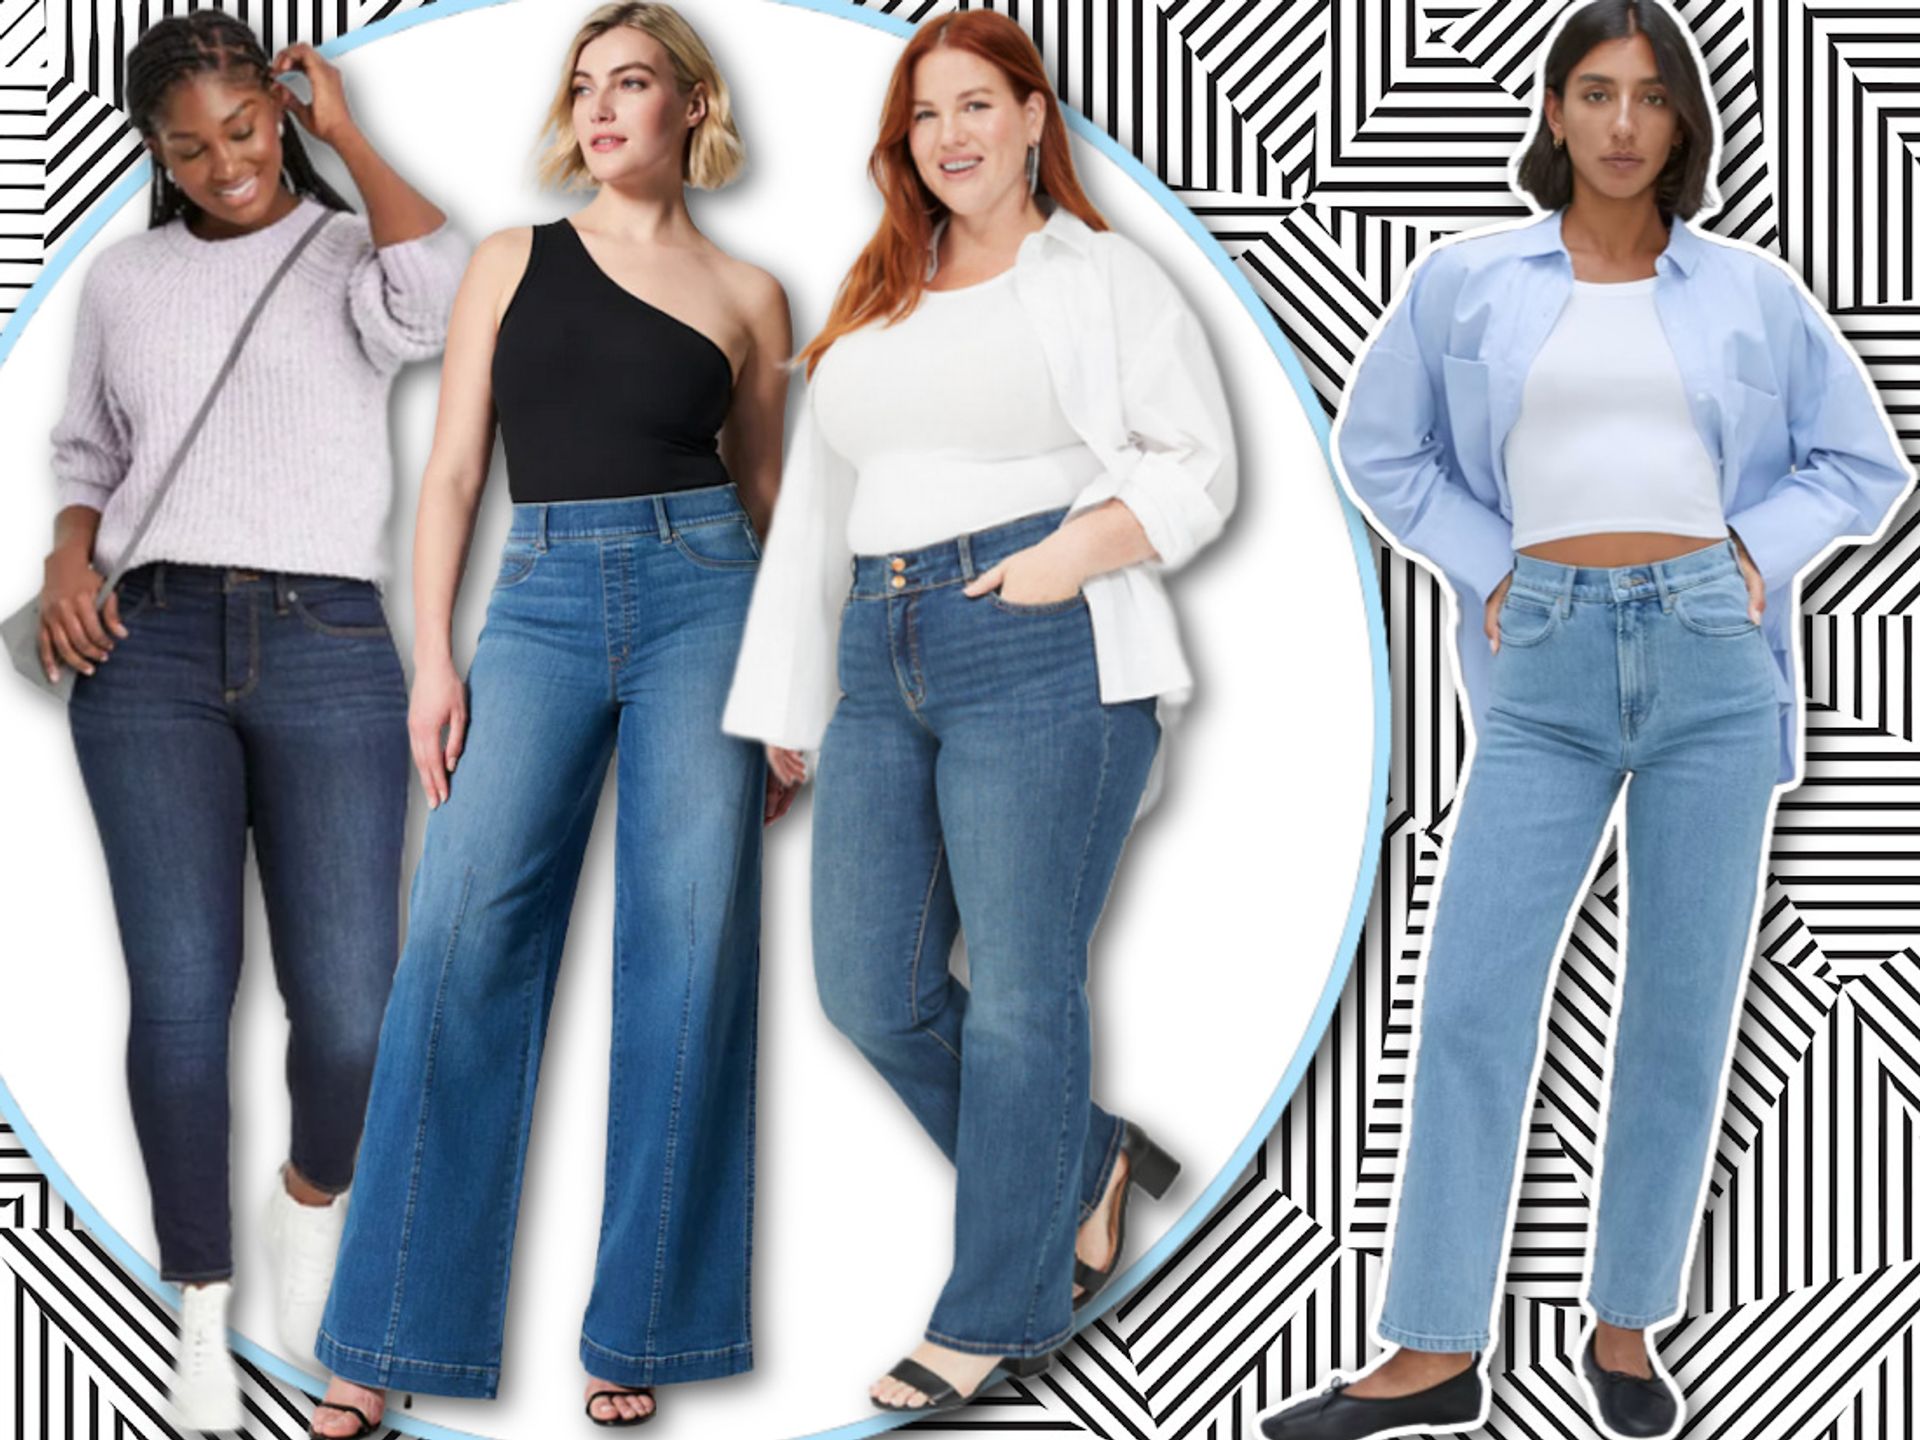 4 Tips for Finding the Best Pants for Curvy Figures